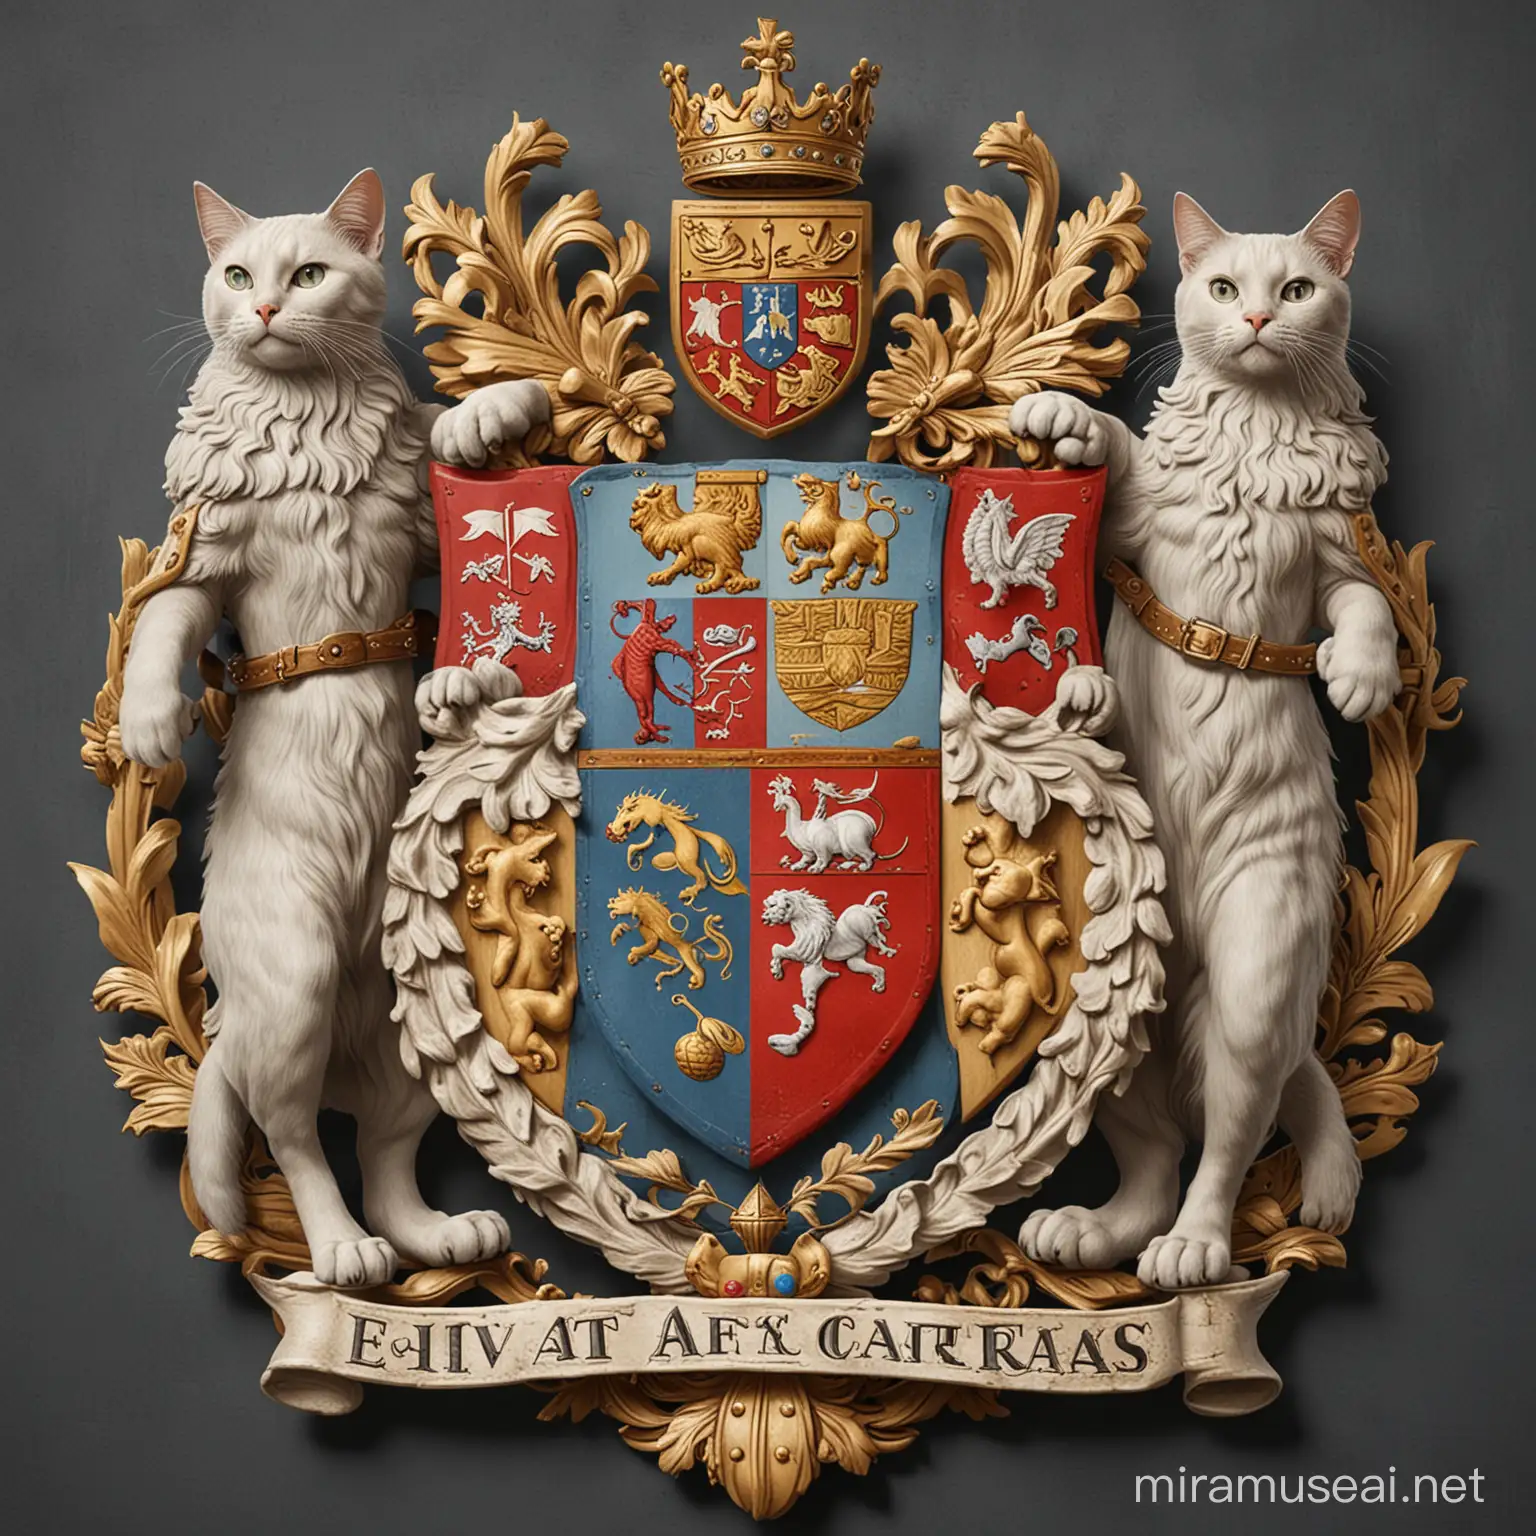 create a coat of arms for a country that has a lot of cats and focuses on equity